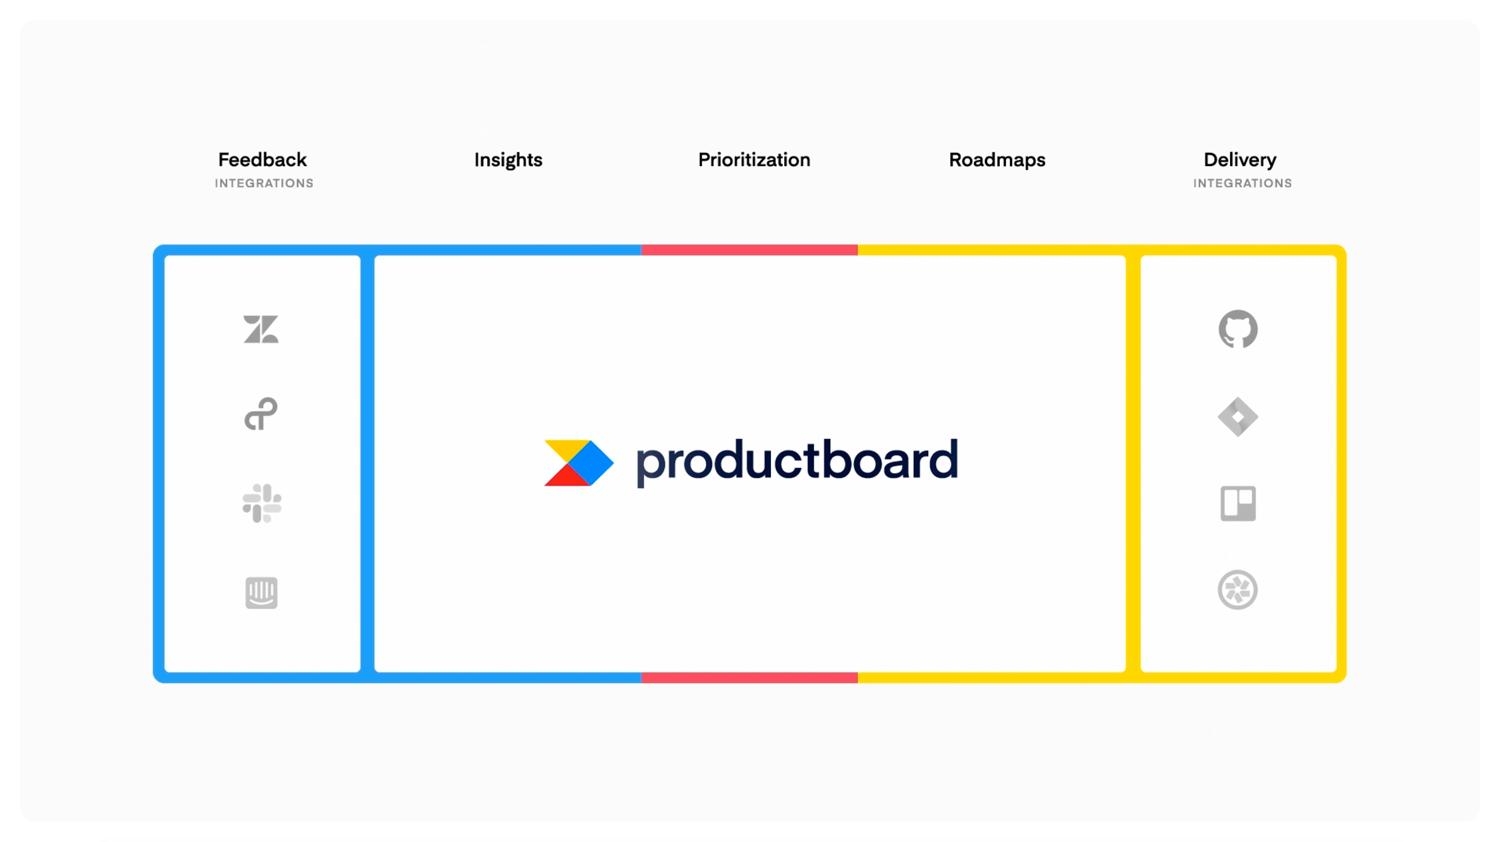 Productboard scales according to your needs